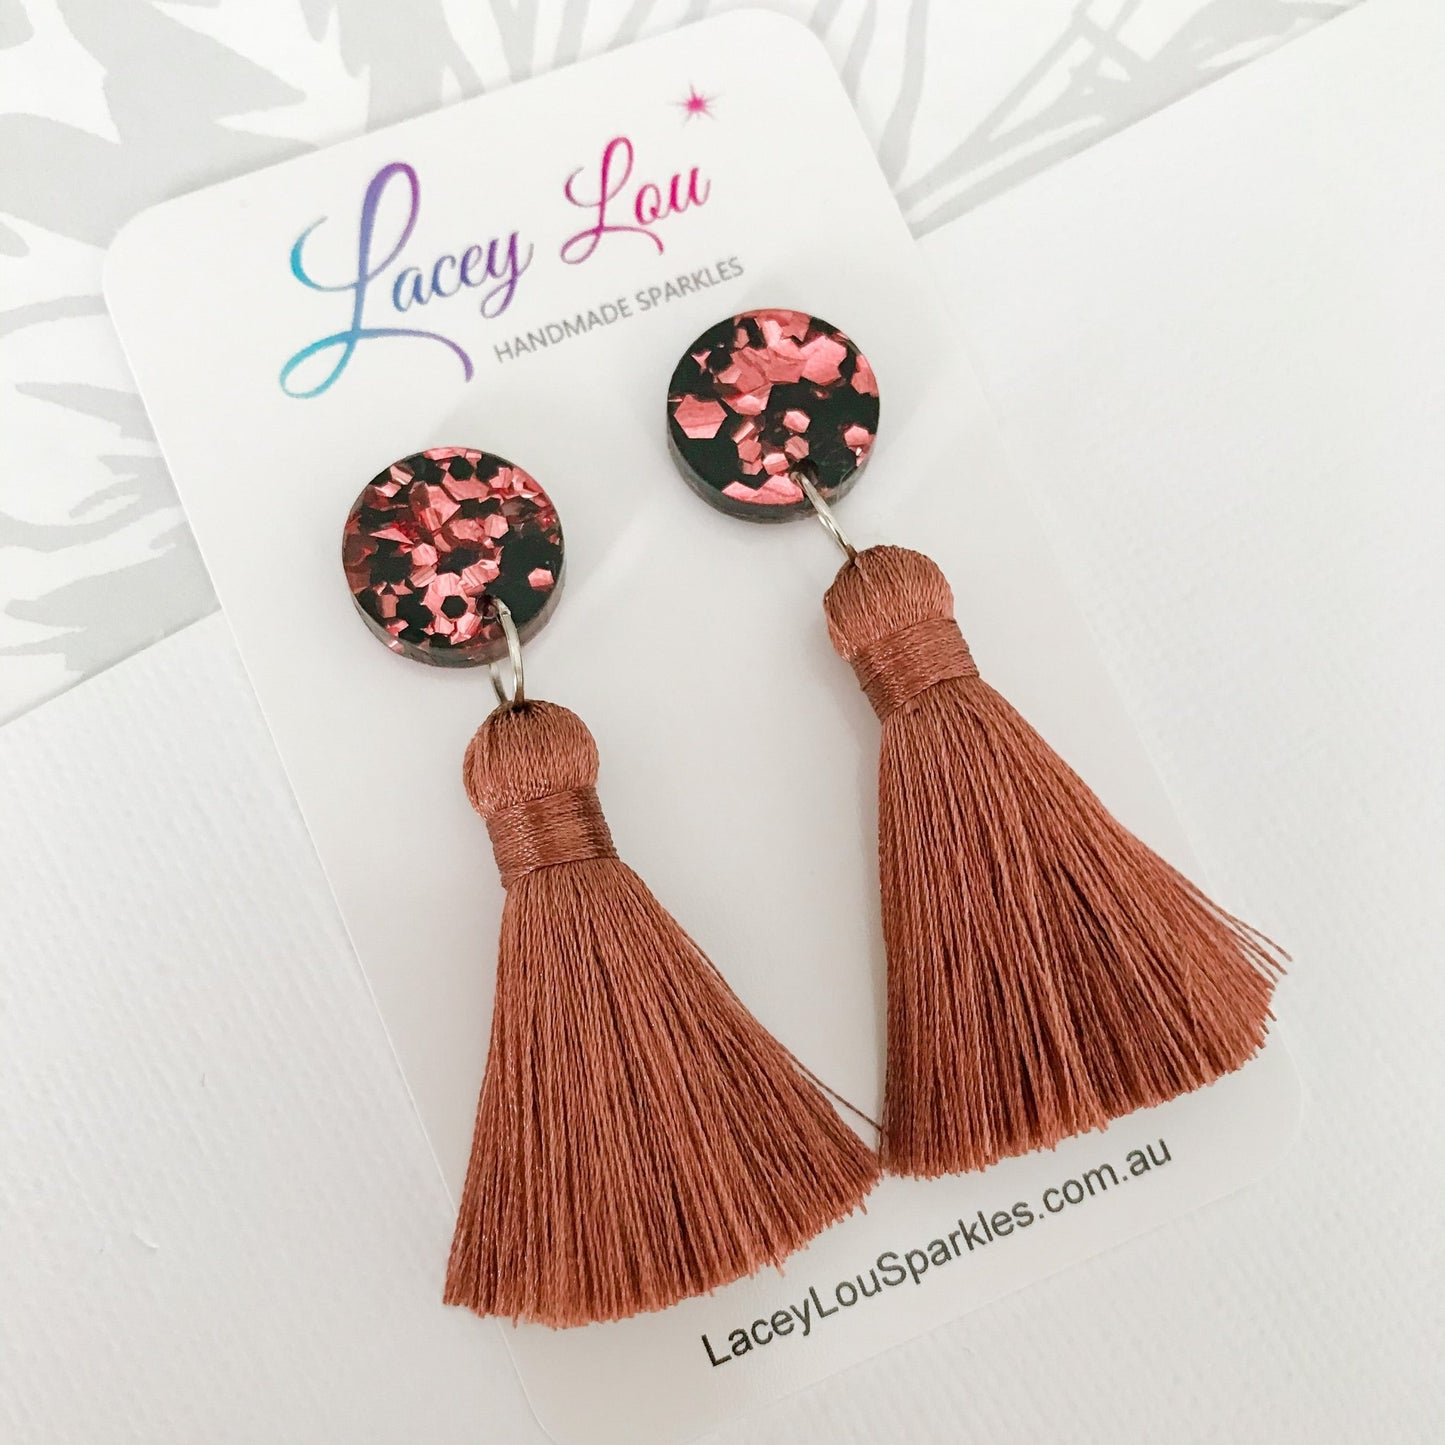 Large Silk Tassel Earring - Chocolate - Lacey Lou Sparkles